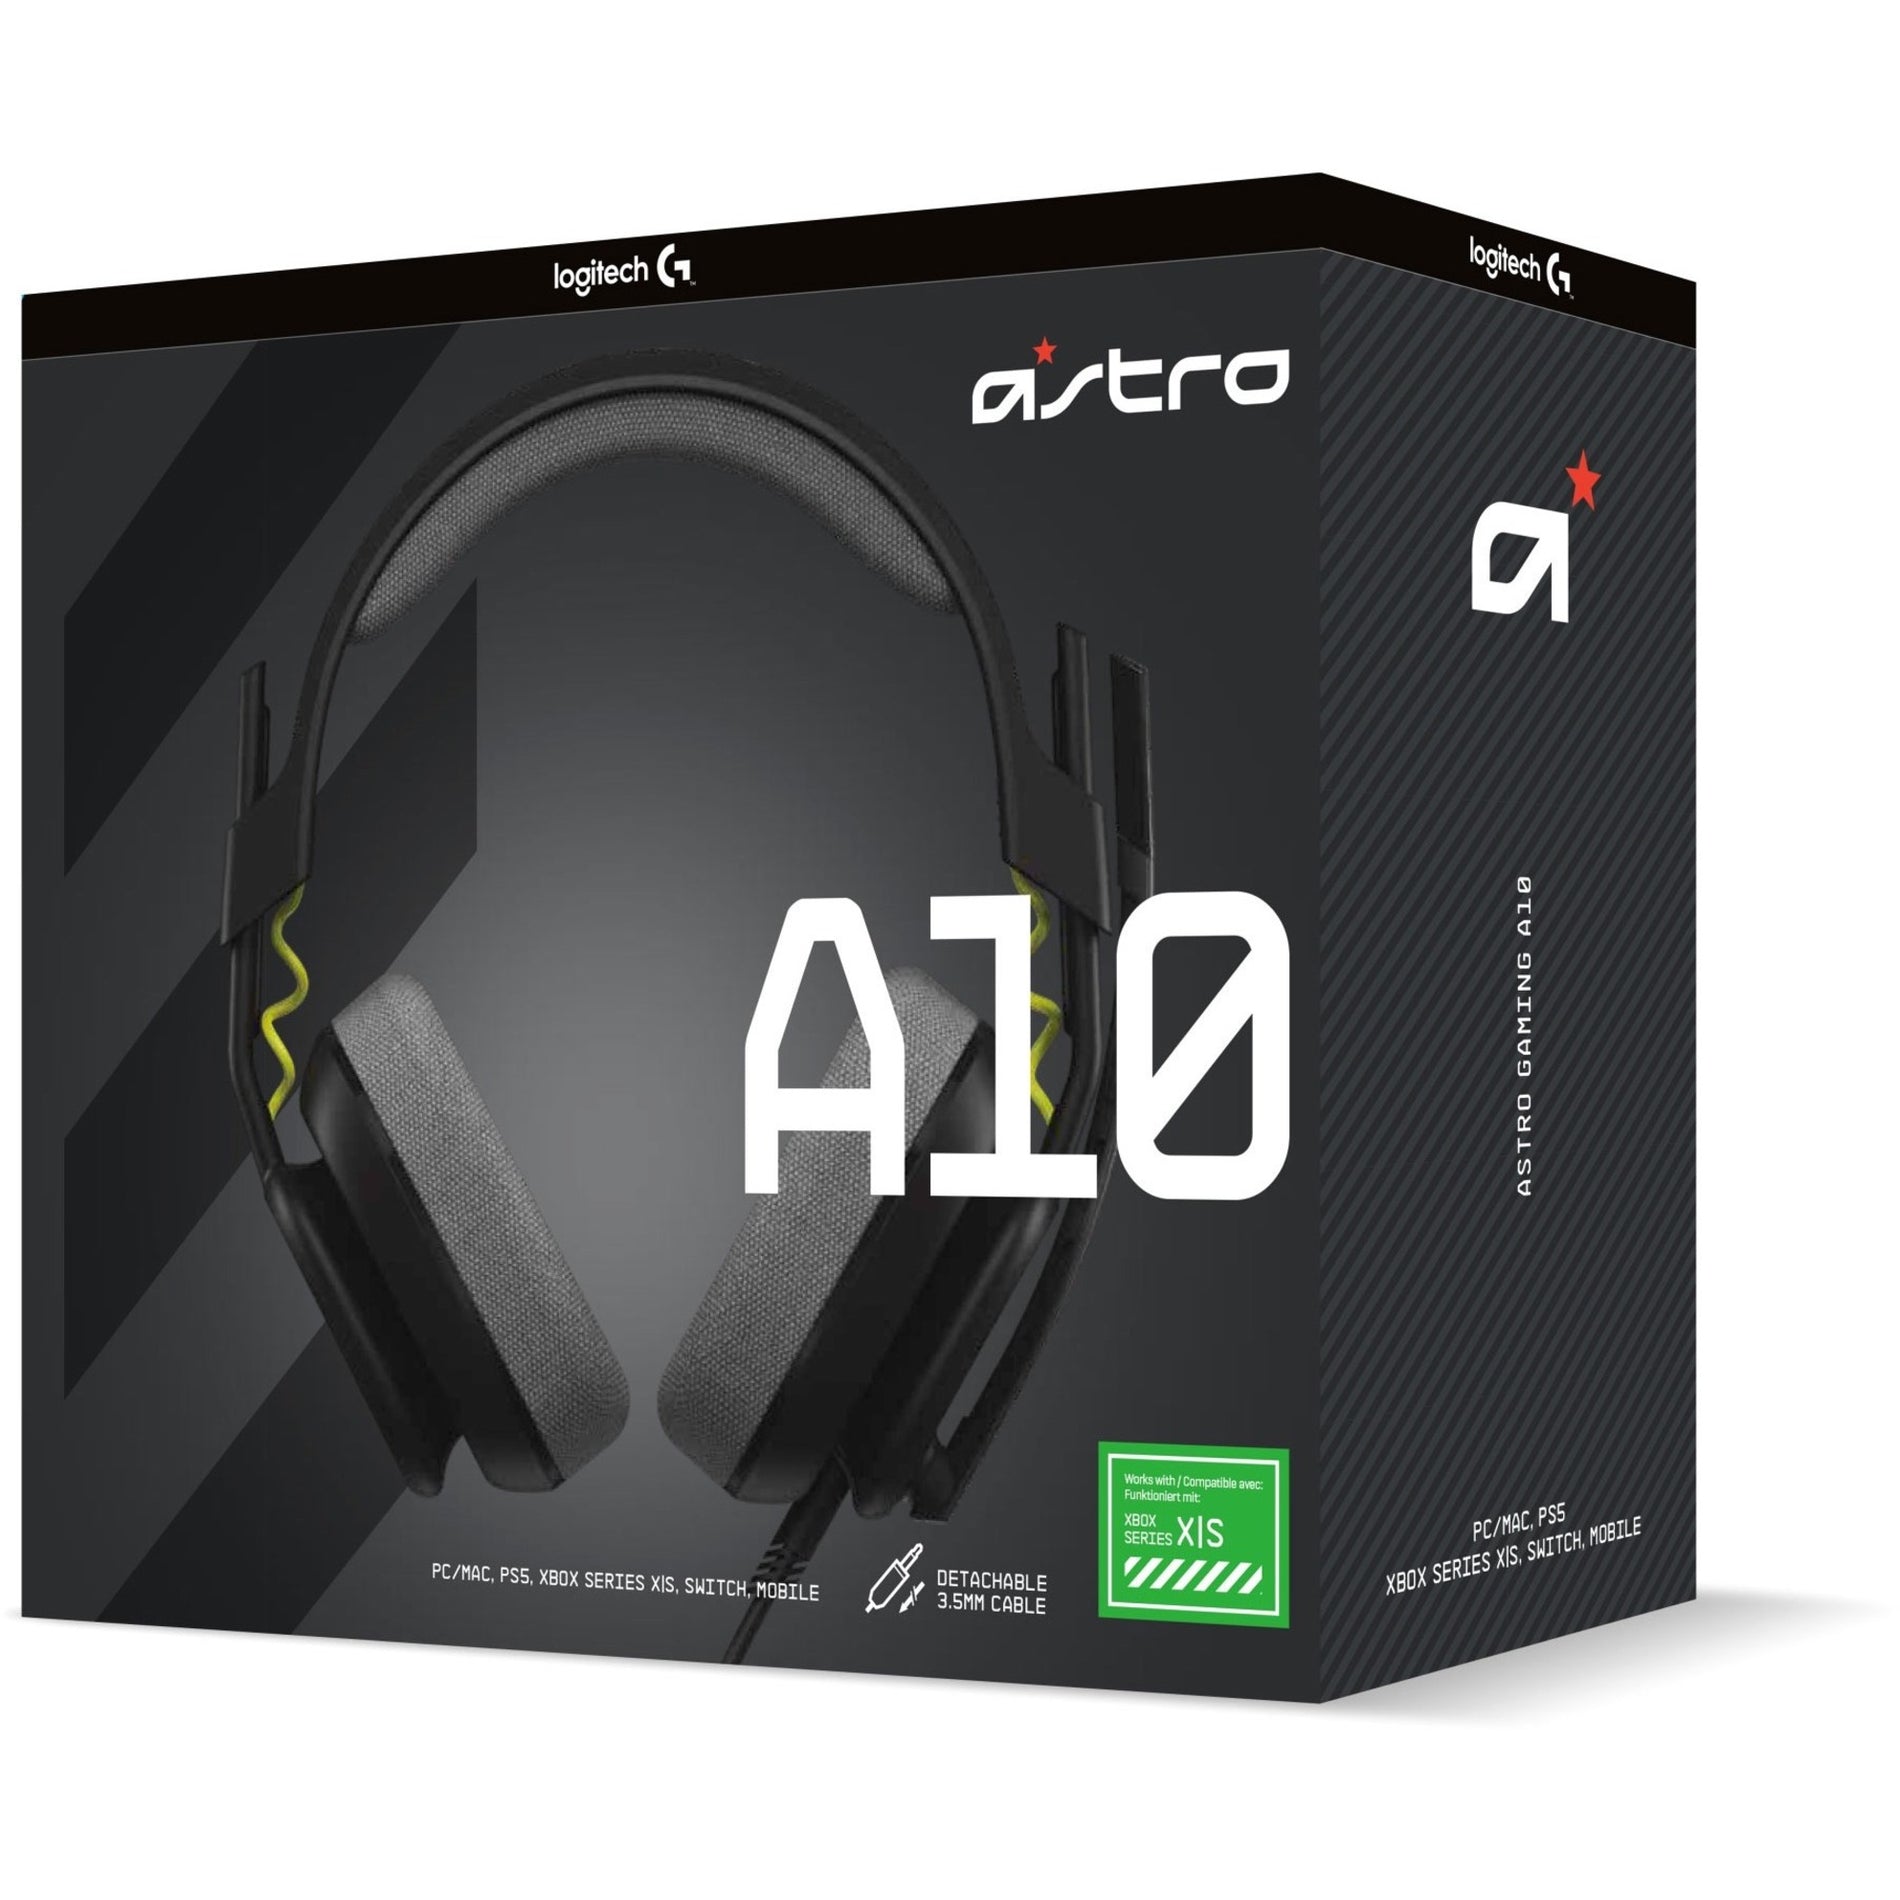 Astro 939-002045 A10 Headset Xbox - Black, Lightweight, Flip to Mute, Durable